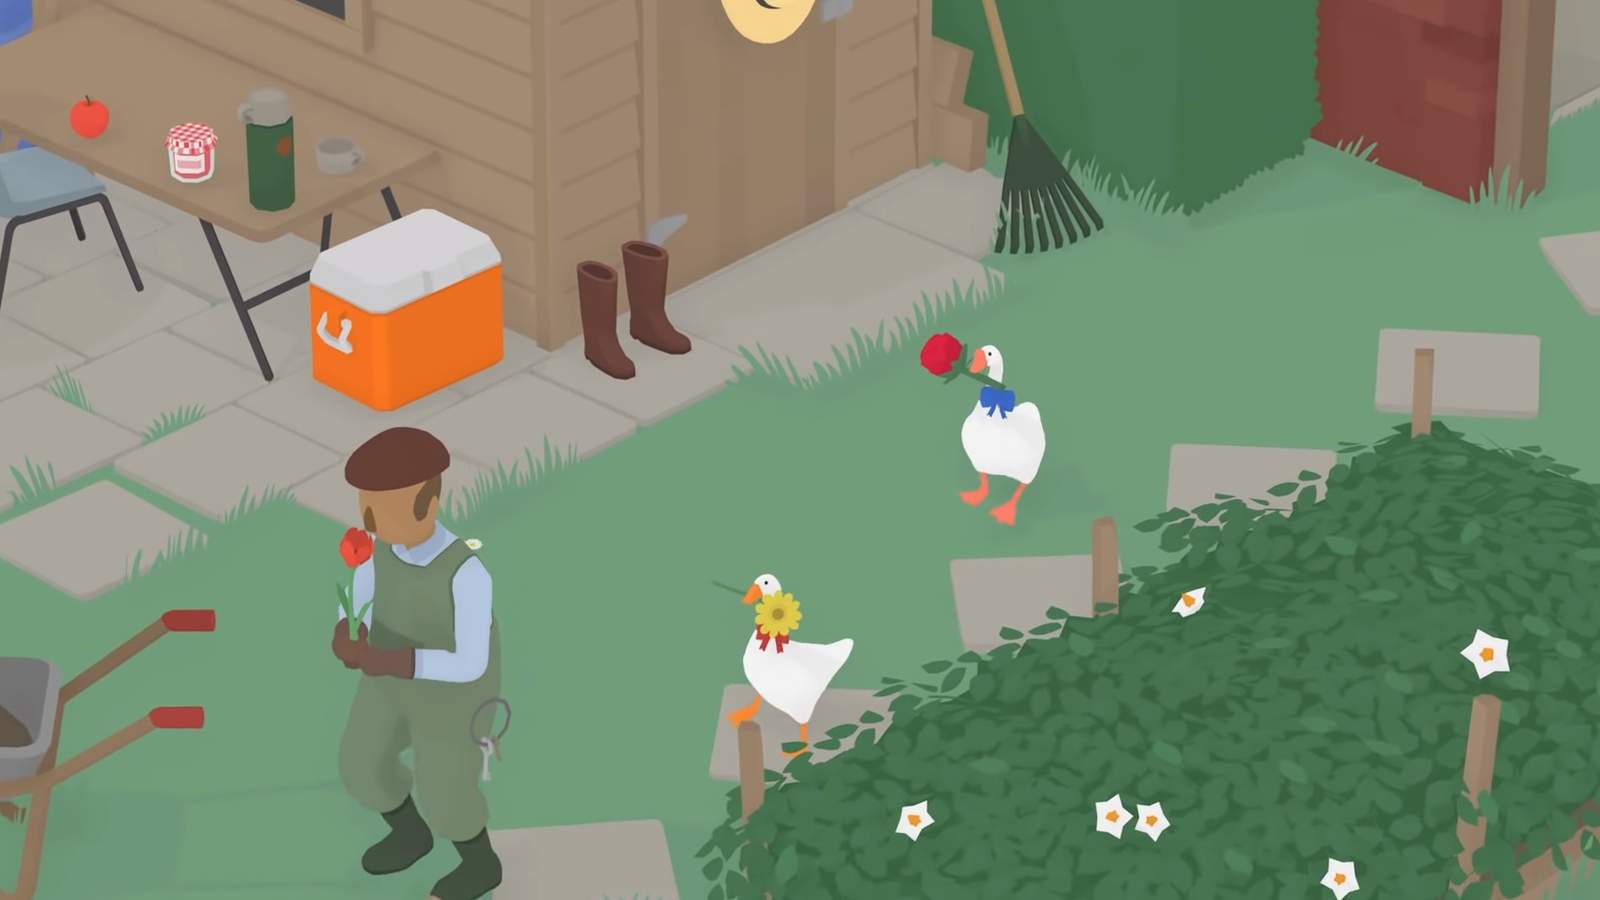 Untitled Goose Game - Nintendo Switch for sale online